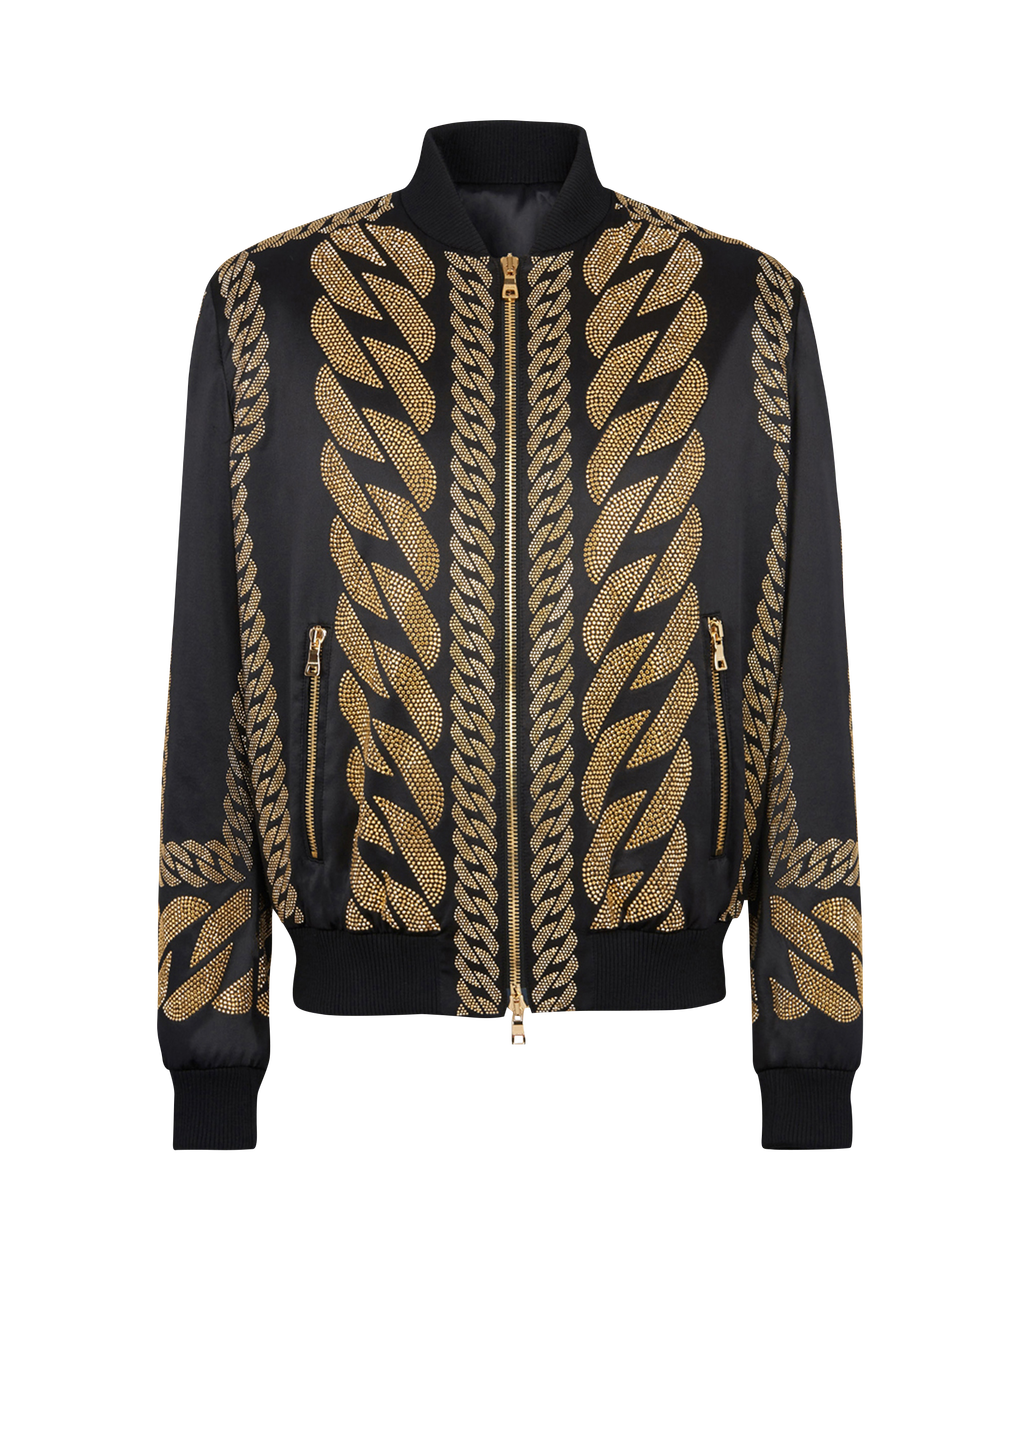 Silk bomber jacket with chain embroidery, black, hi-res